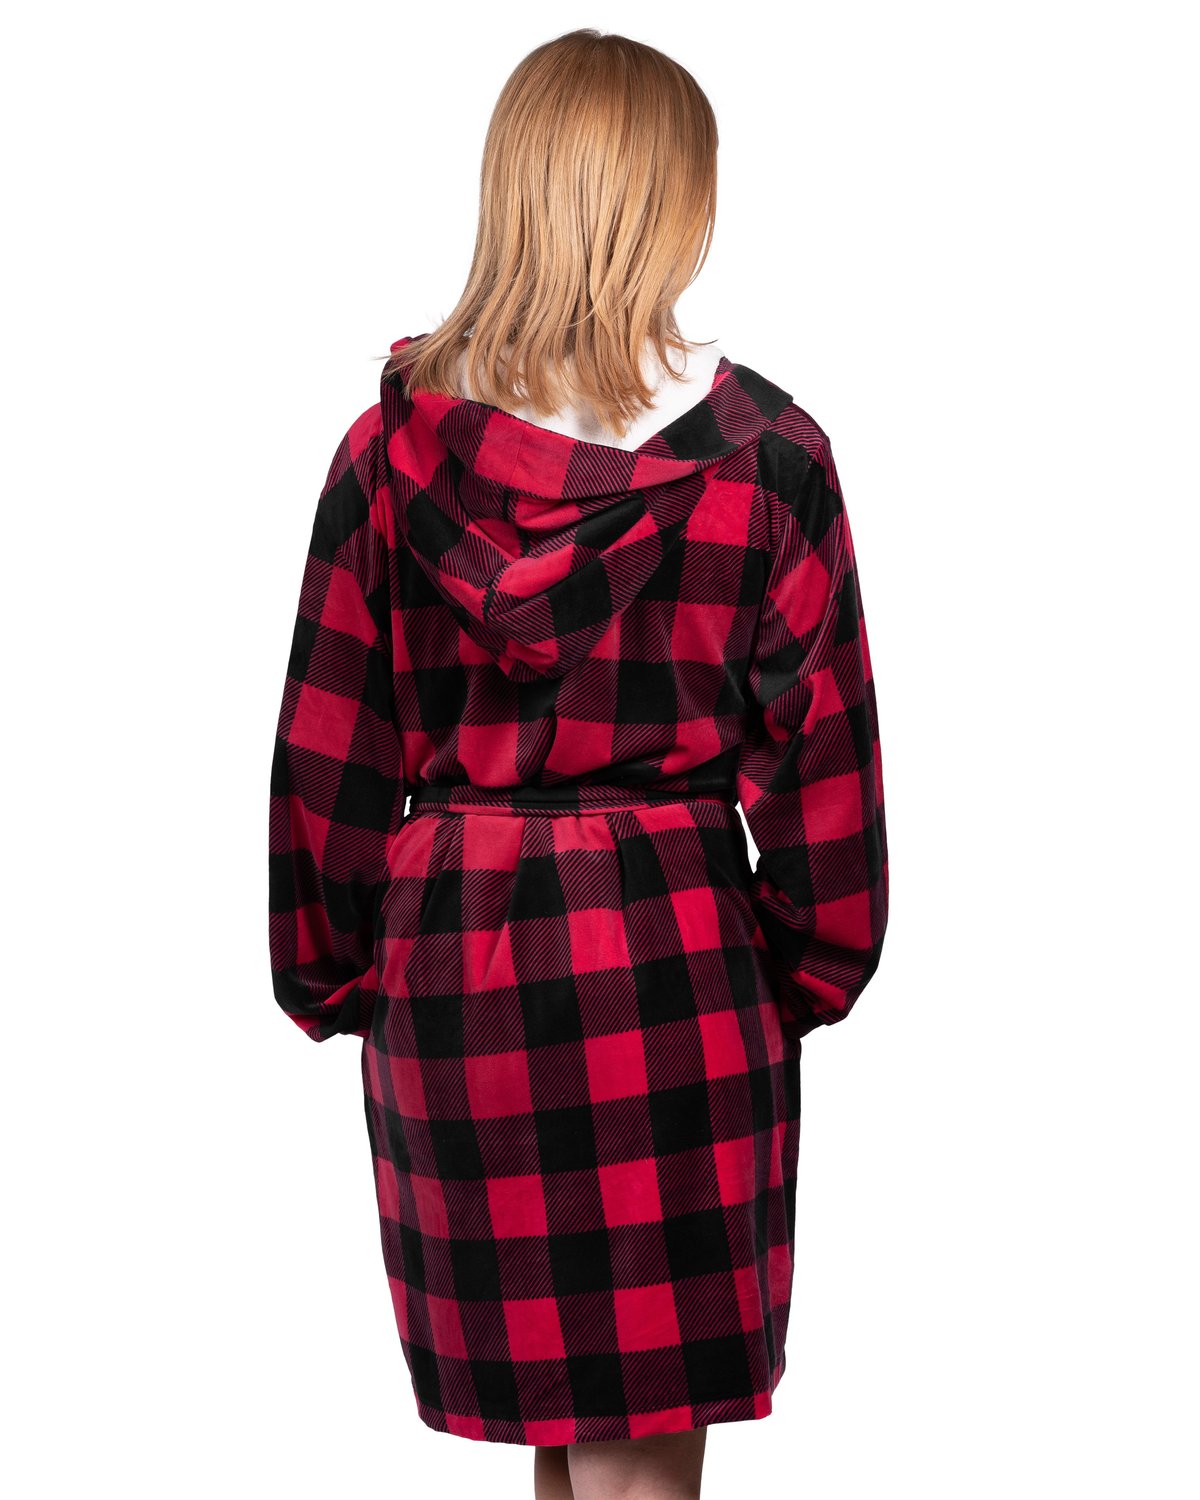 Coffee Shoppe Stay-at-Home Hooded Lounge Robe - Deep Red Buffalo Plaid